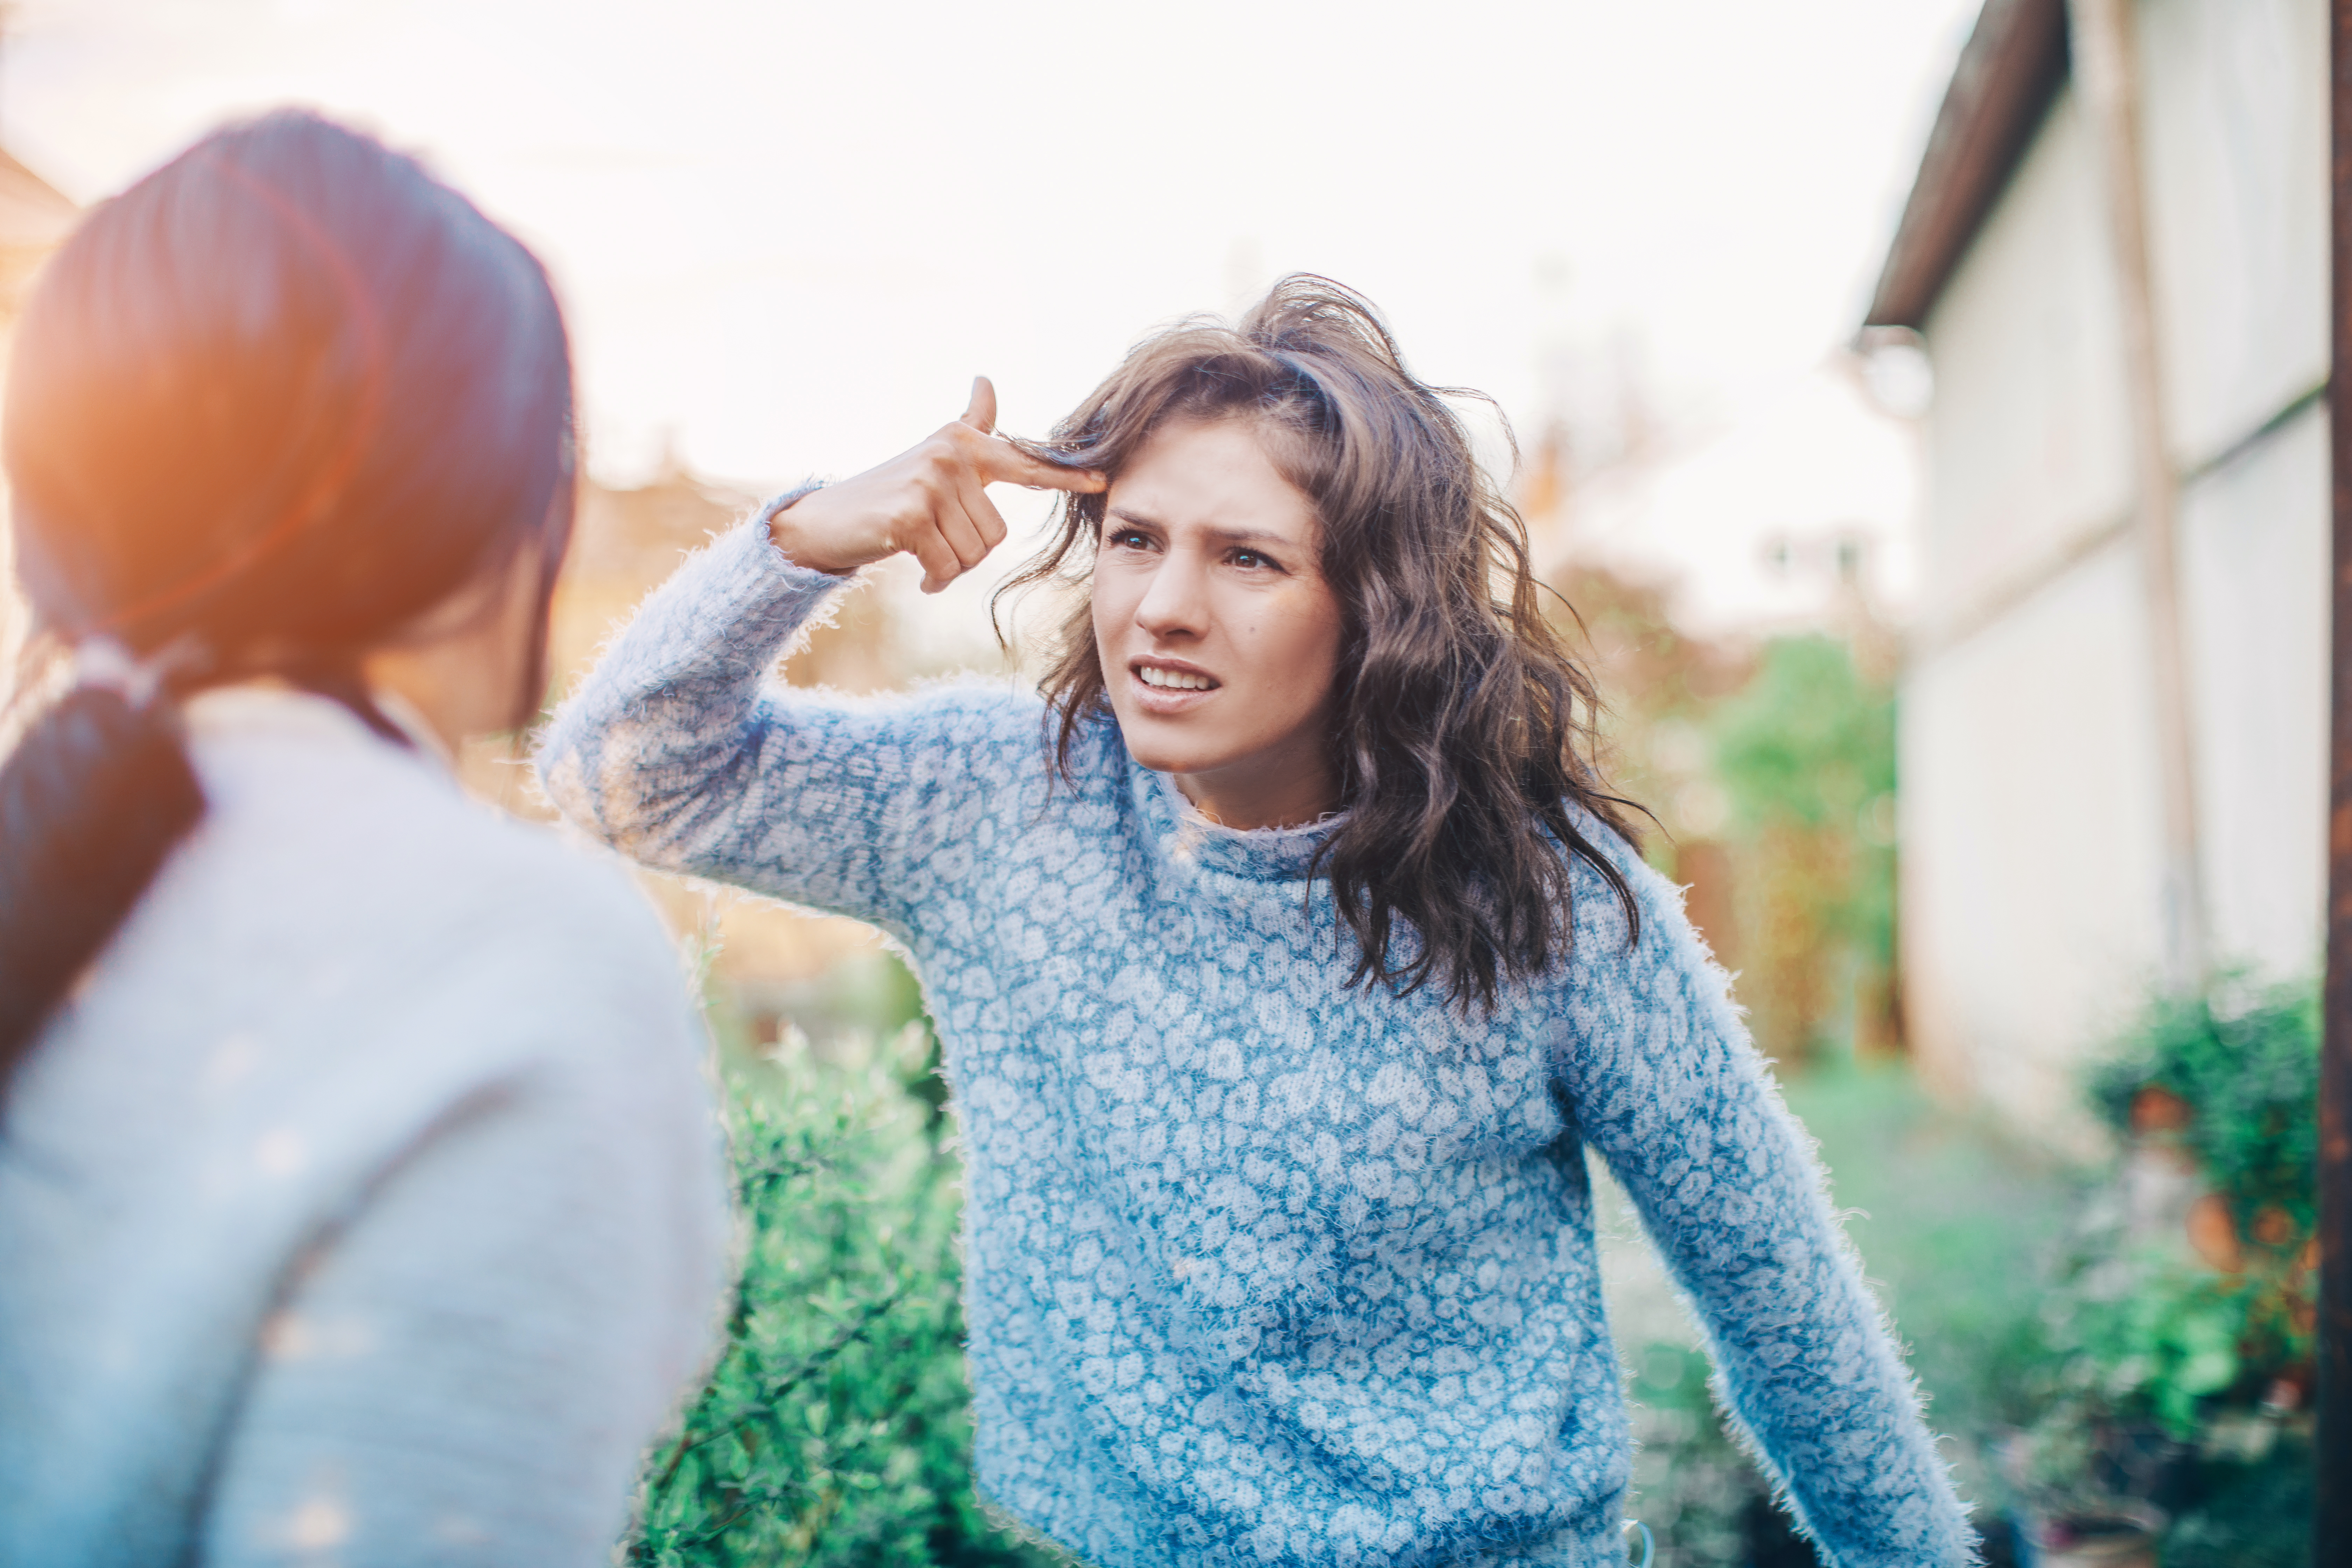 Two women arguing with each other | Source: Shutterstock